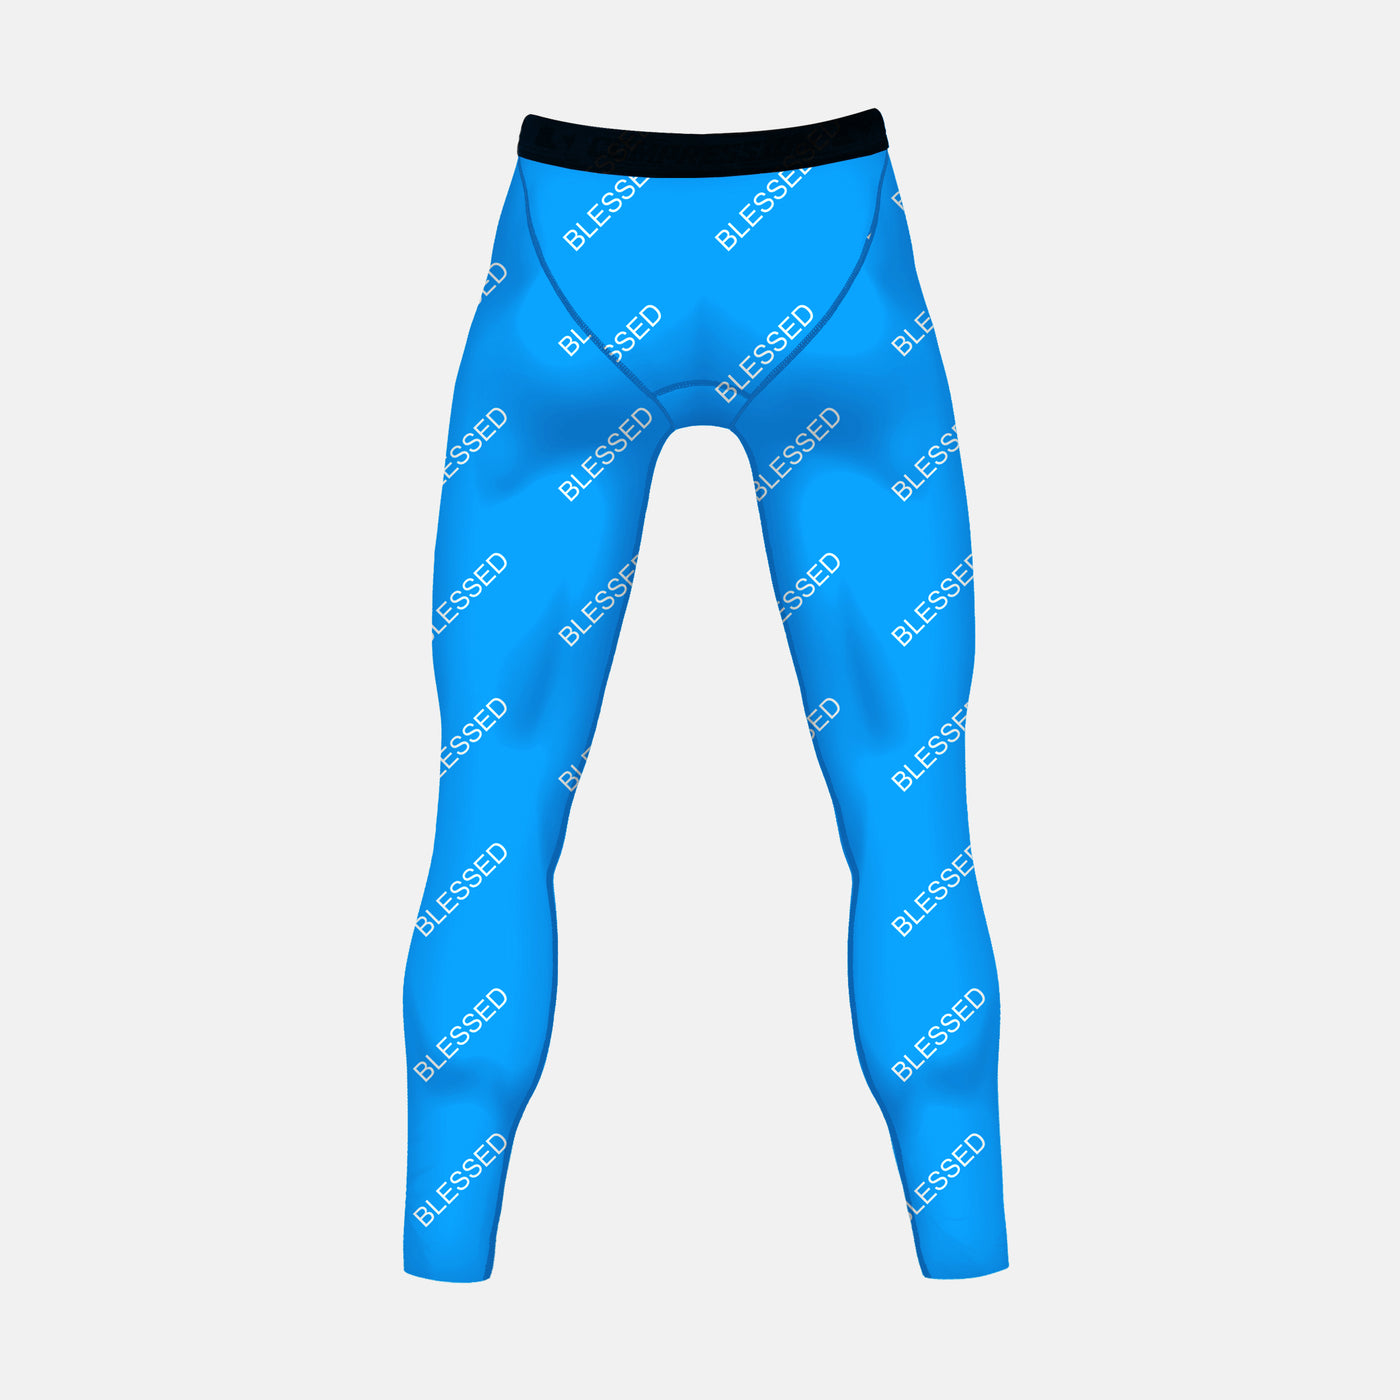 Blessed Pattern Blue Tights for Men